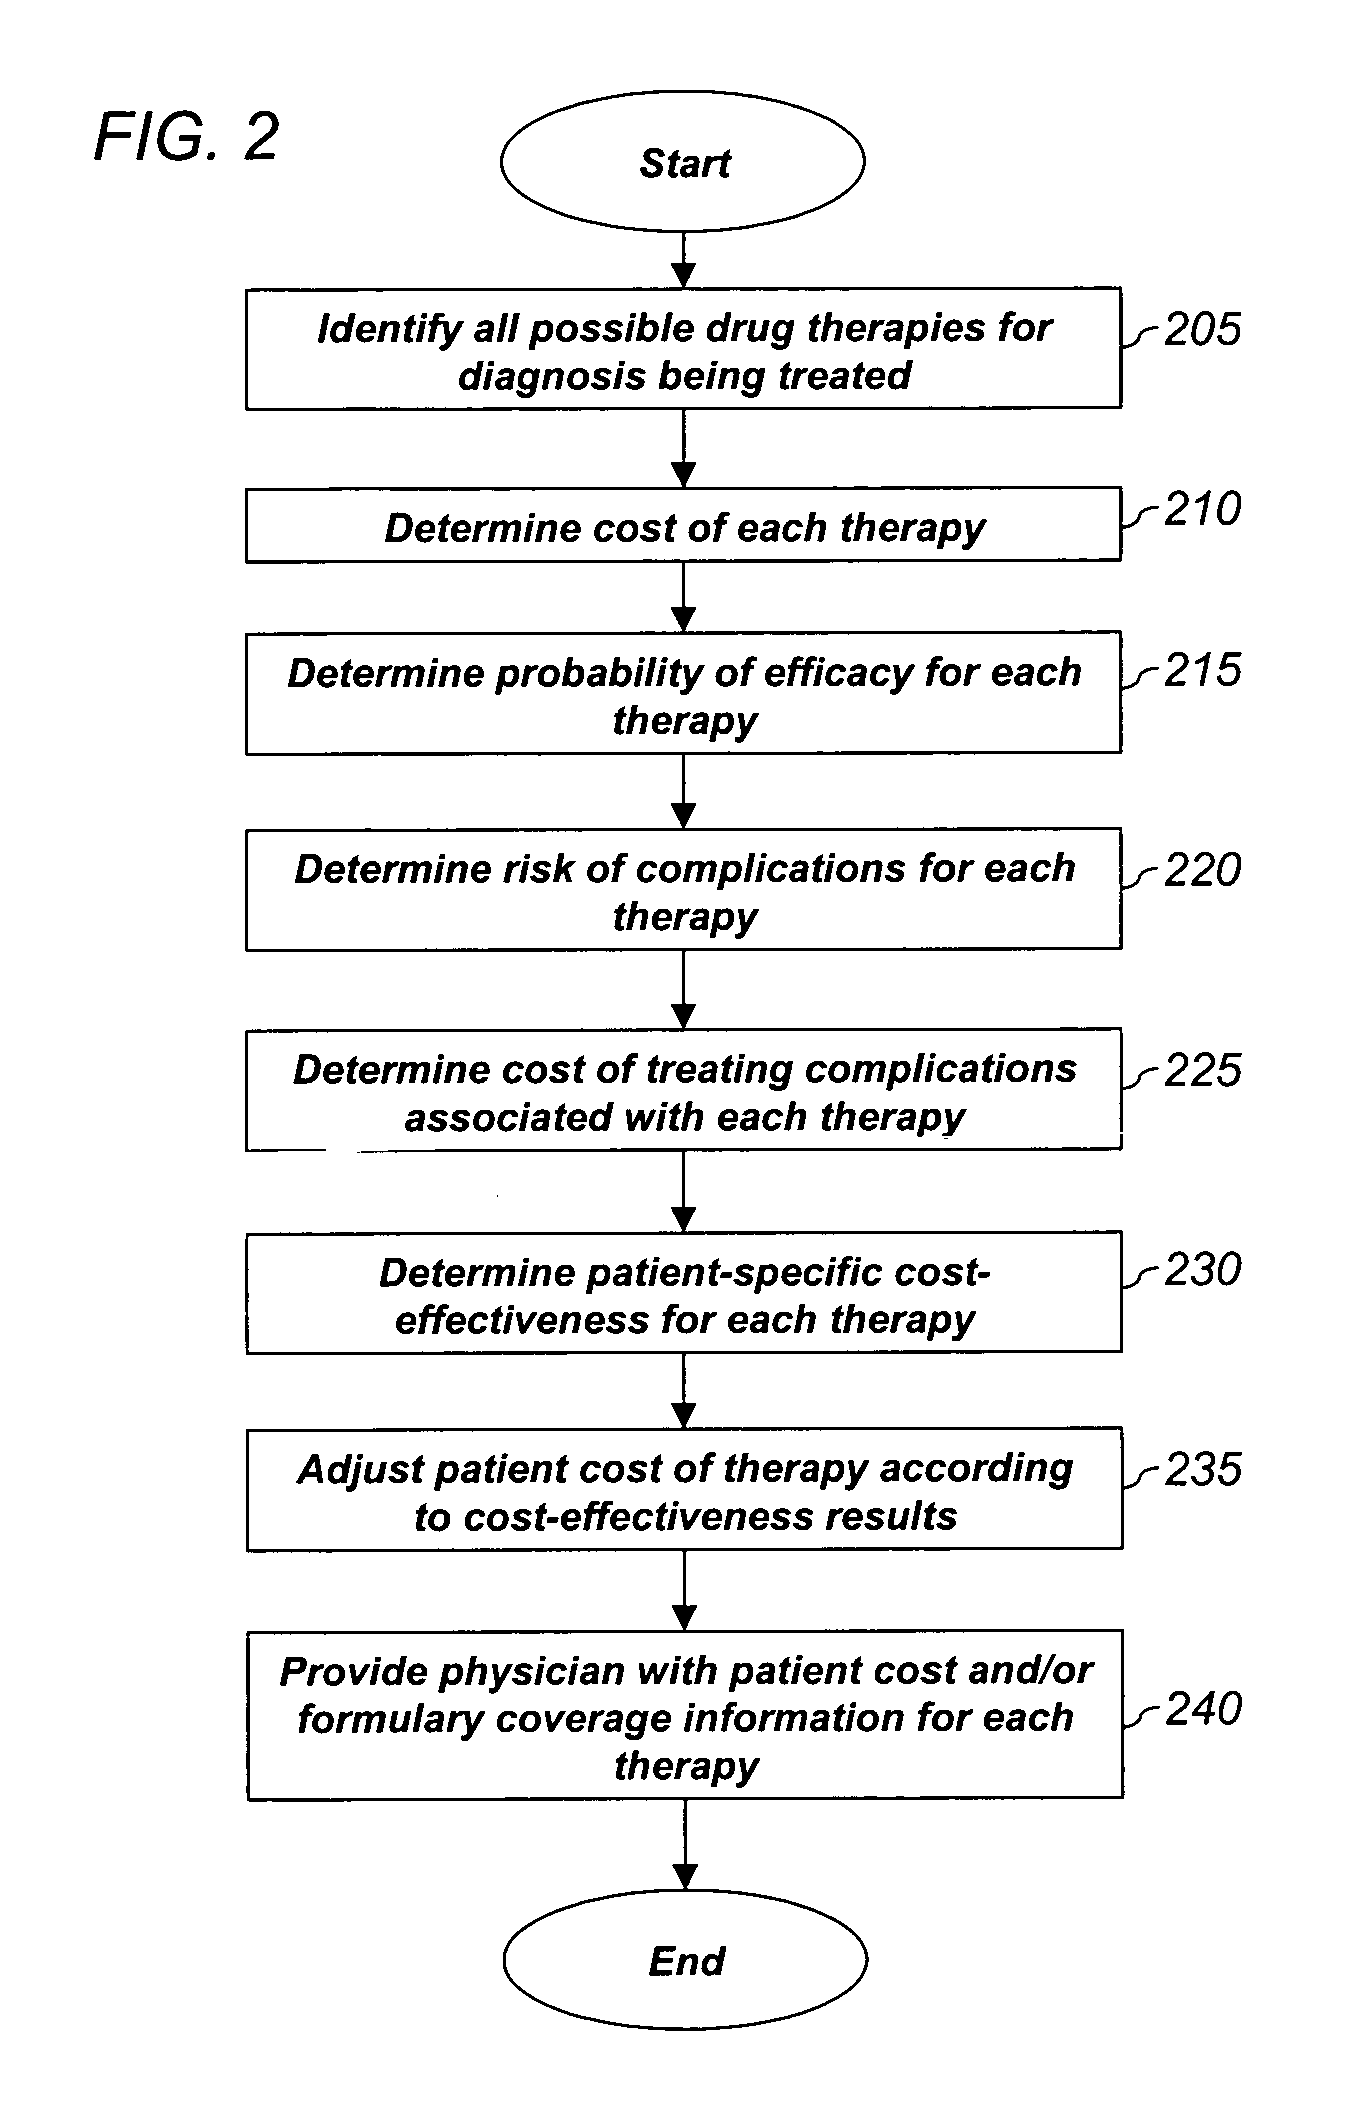 System and method for dynamic adjustment of copayment for medication therapy